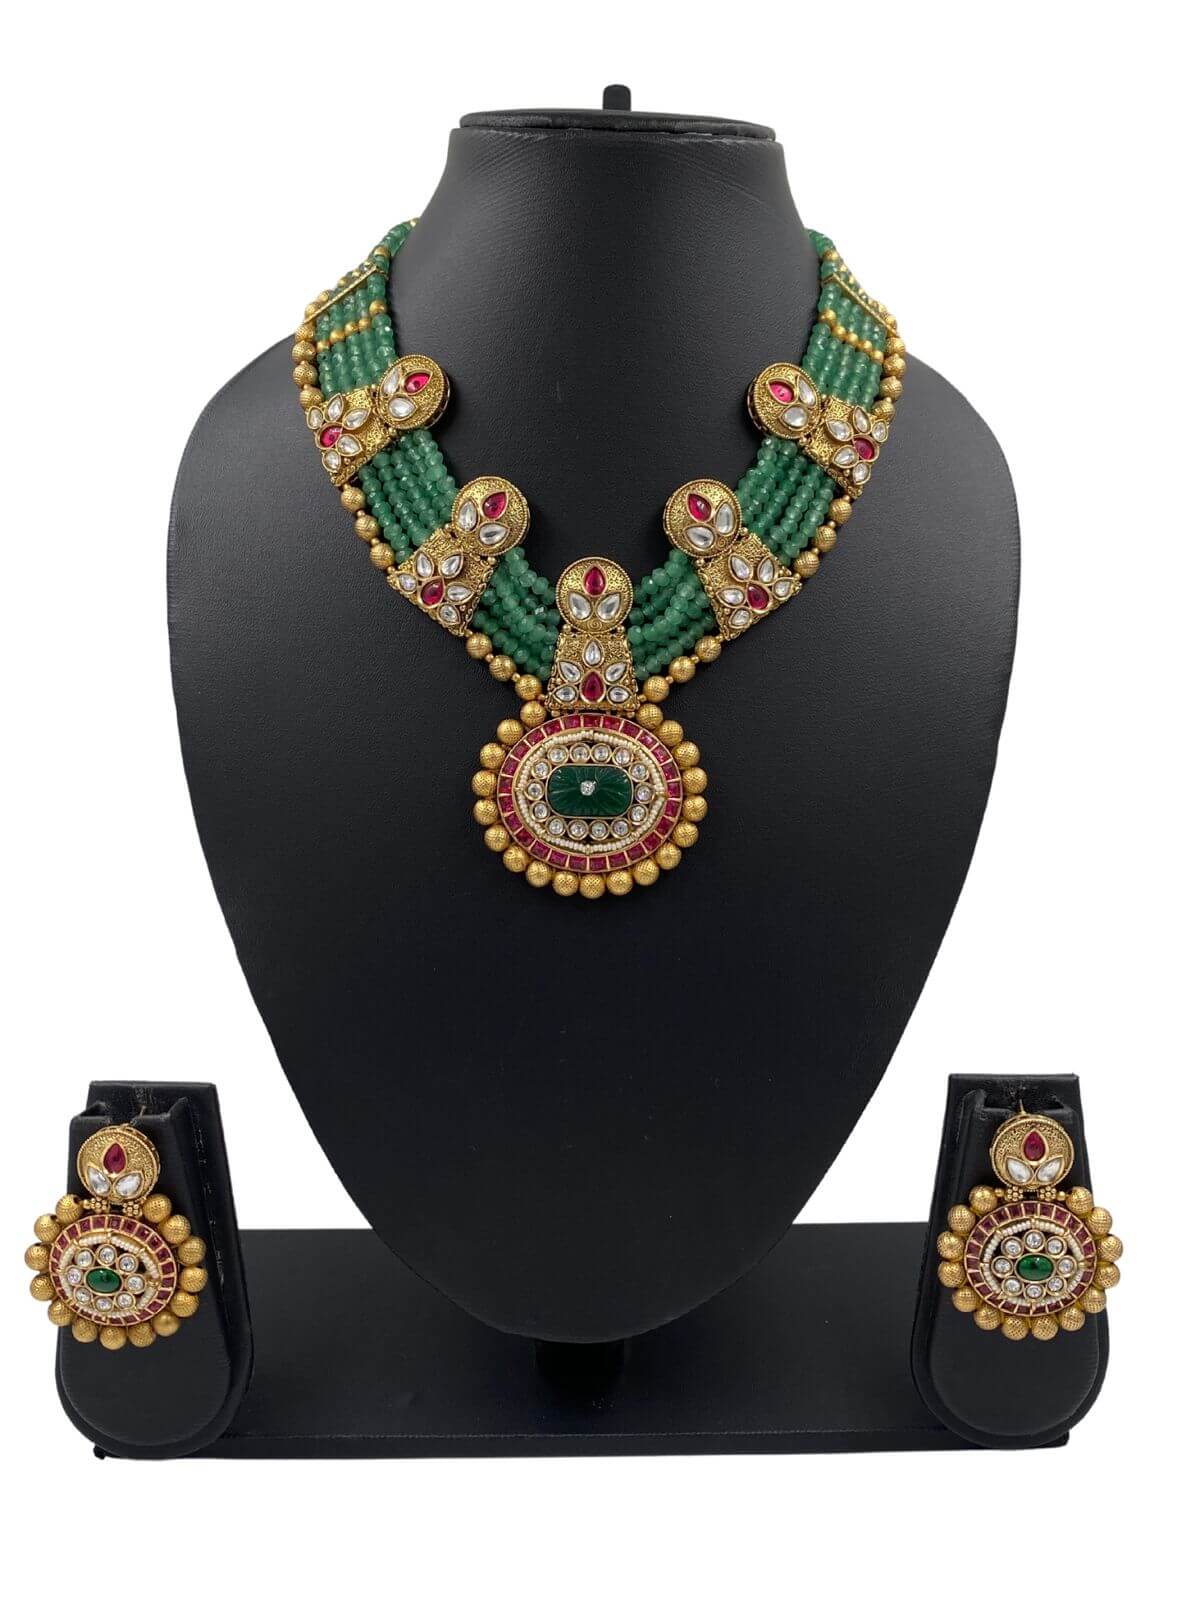 Royal Look Mint Green Antique Gold Jewellery Necklace Set For Weddings